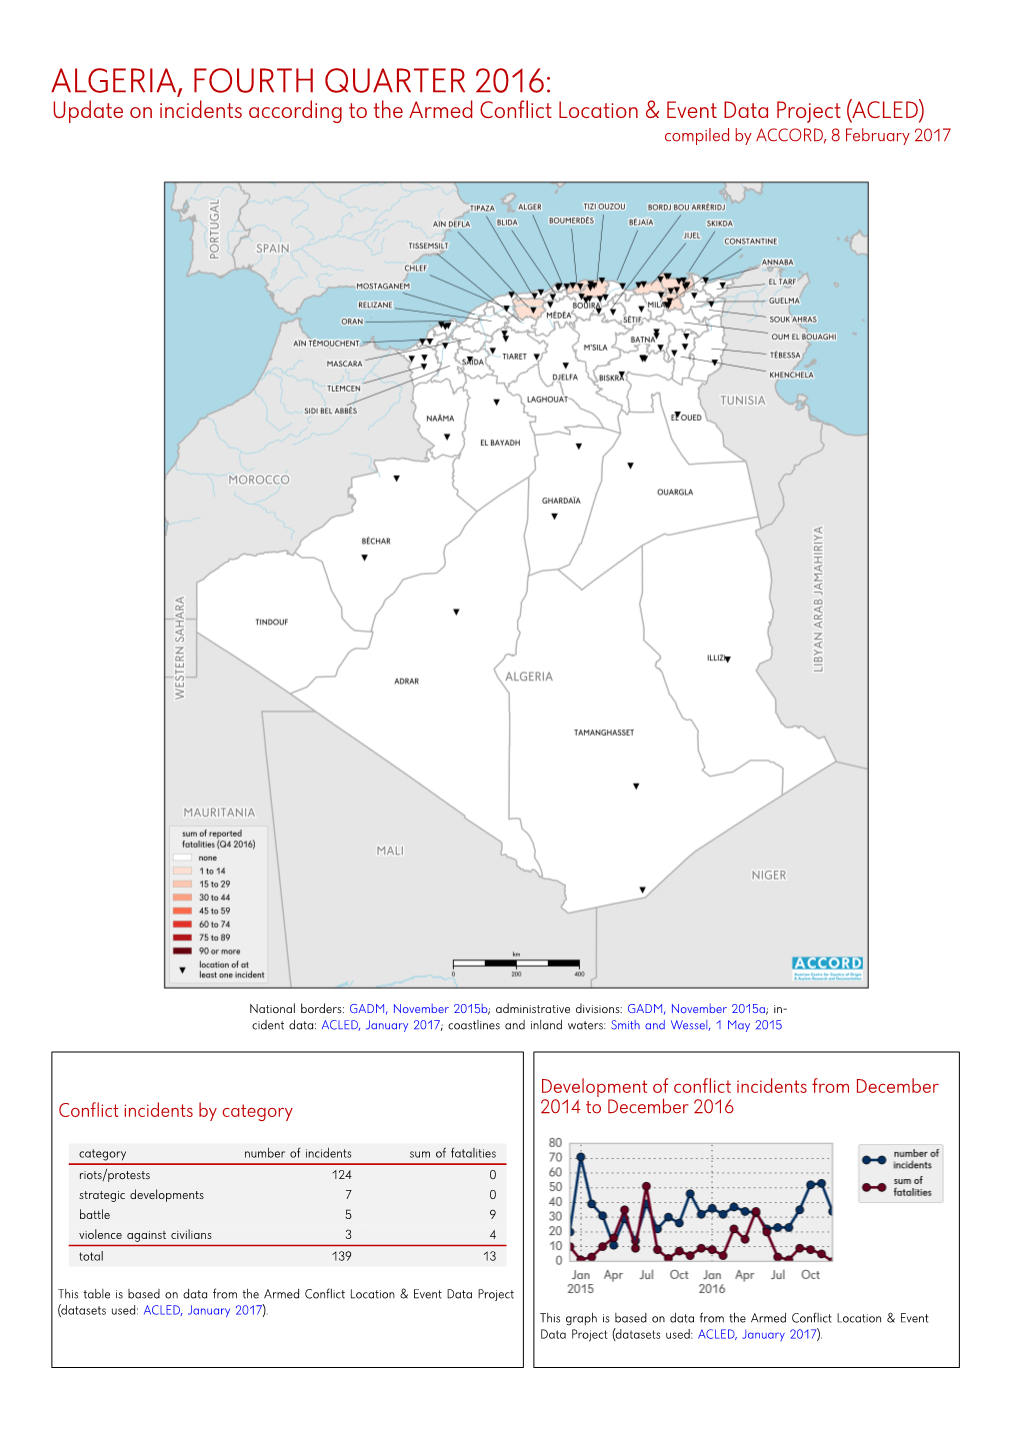 ALGERIA, FOURTH QUARTER 2016: Update on Incidents According to the Armed Conflict Location & Event Data Project (ACLED) Compiled by ACCORD, 8 February 2017